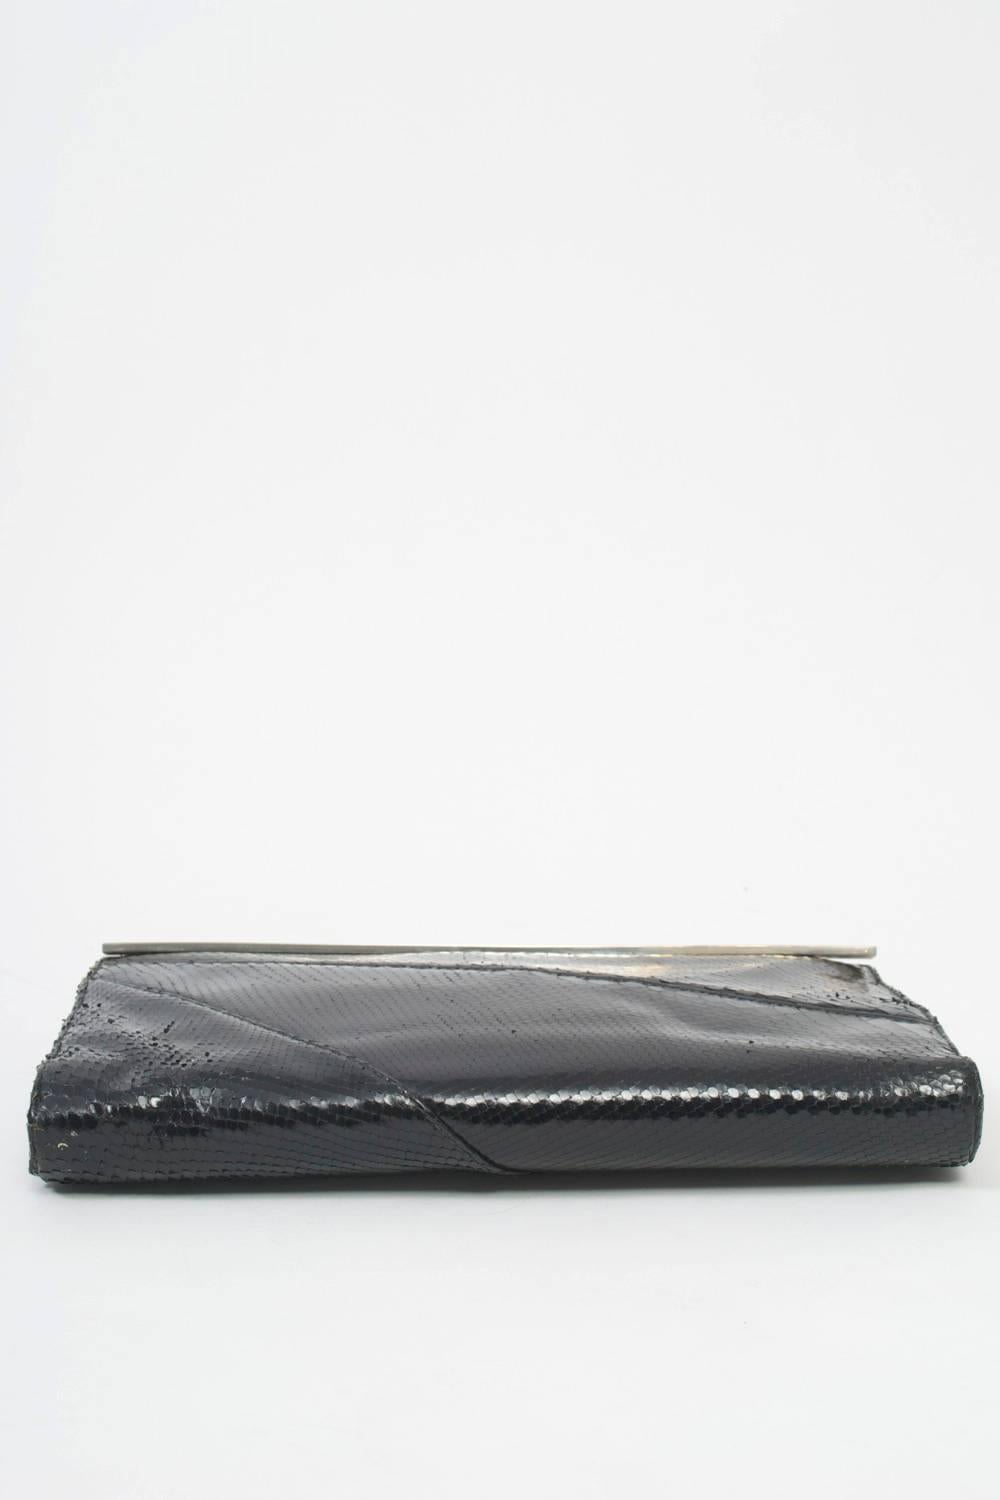 1970s Black Snake Clutch In Excellent Condition For Sale In Alford, MA